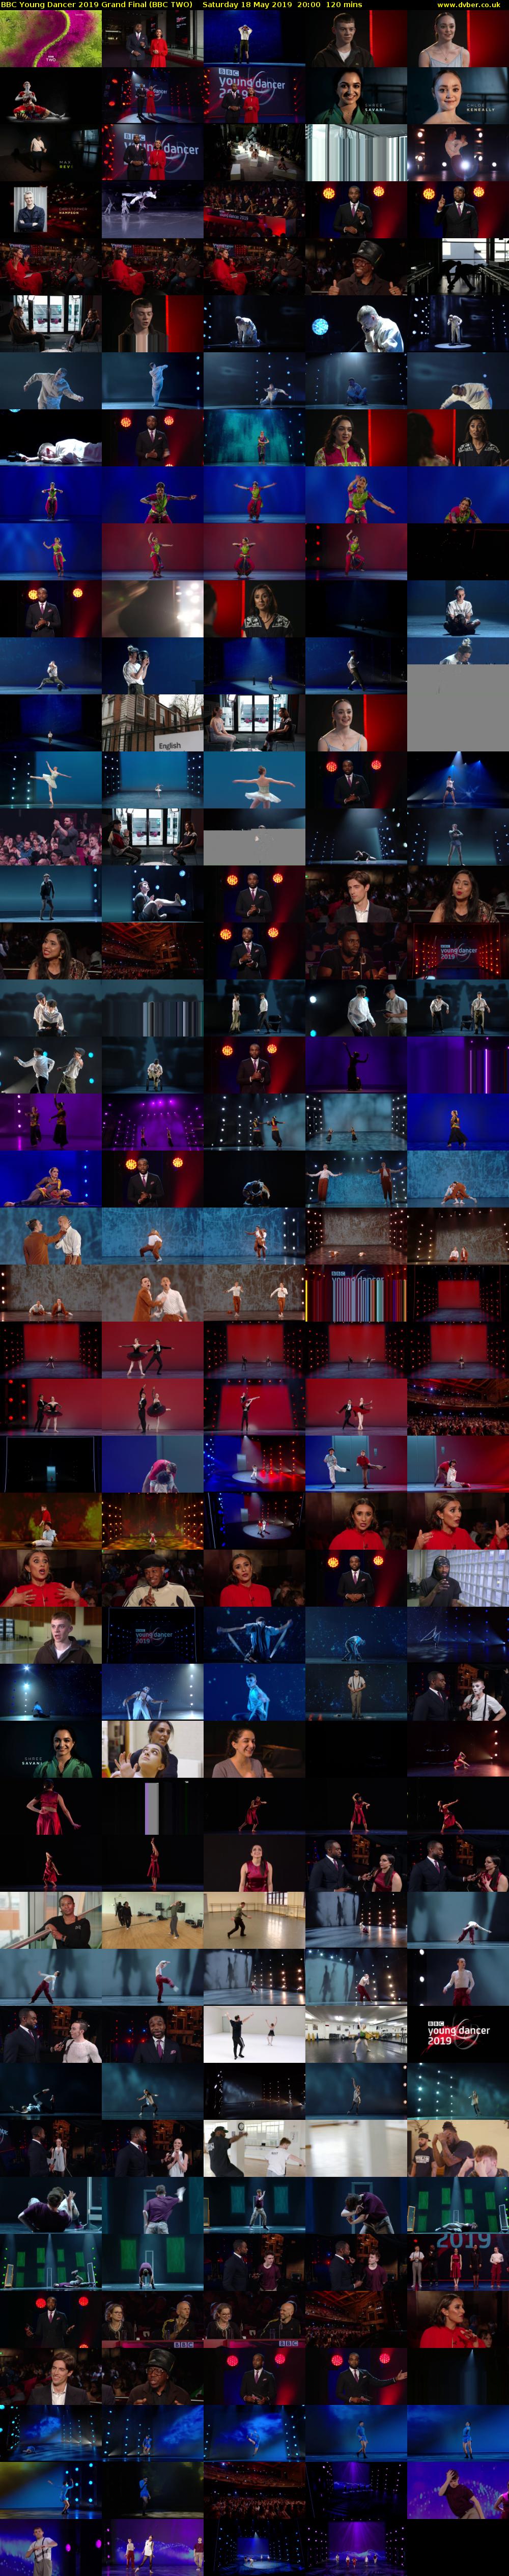 BBC Young Dancer 2019 Grand Final (BBC TWO) Saturday 18 May 2019 20:00 - 22:00